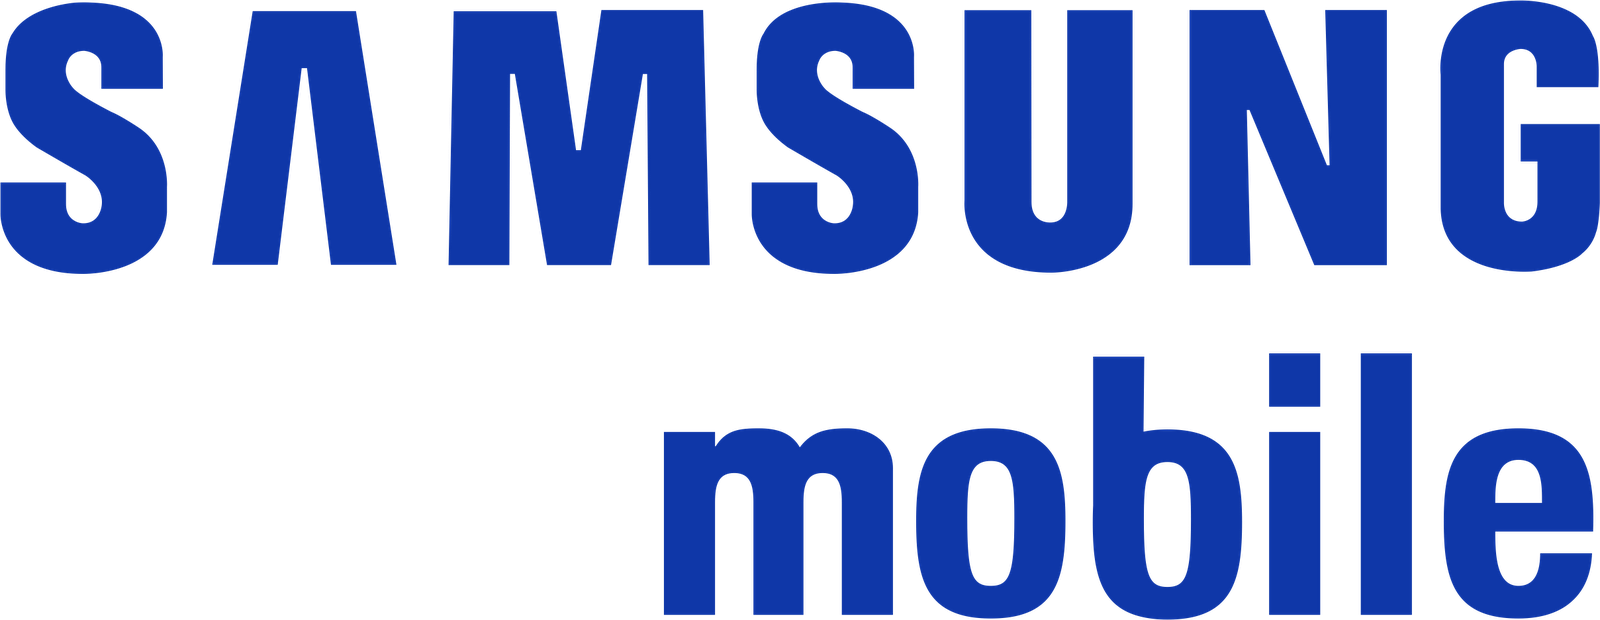 Download Samsung Galaxy USB Drivers Android for all models